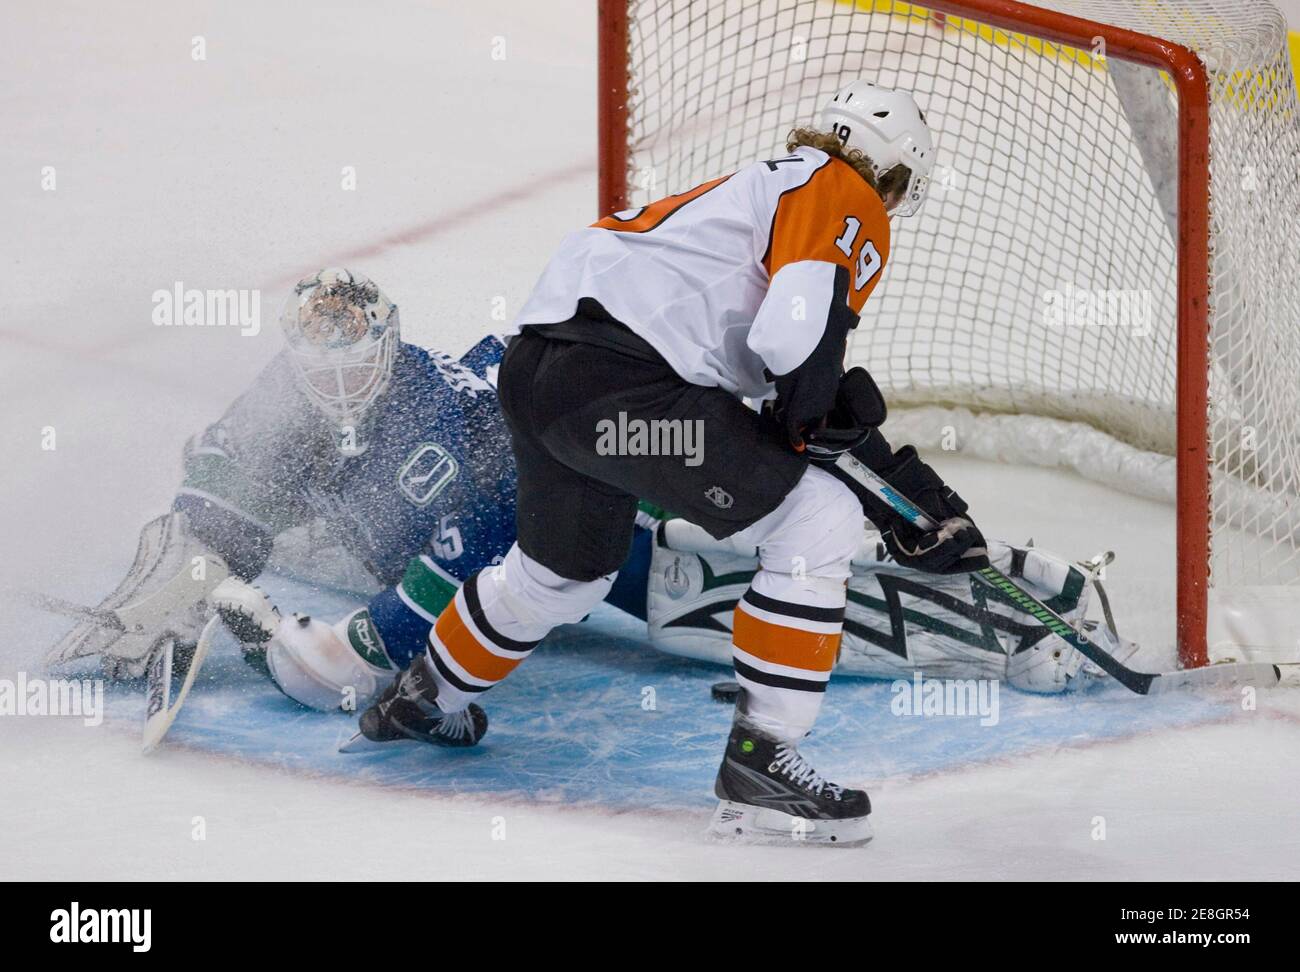 Vancouver Canucks goalie Cory Schneider (L) stops Phildadelphia Flyers Scott Hartnell during third period NHL hockey in Vancouver, British Columbia December 30, 2008.         REUTERS/Andy Clark     (CANADA) Stock Photo